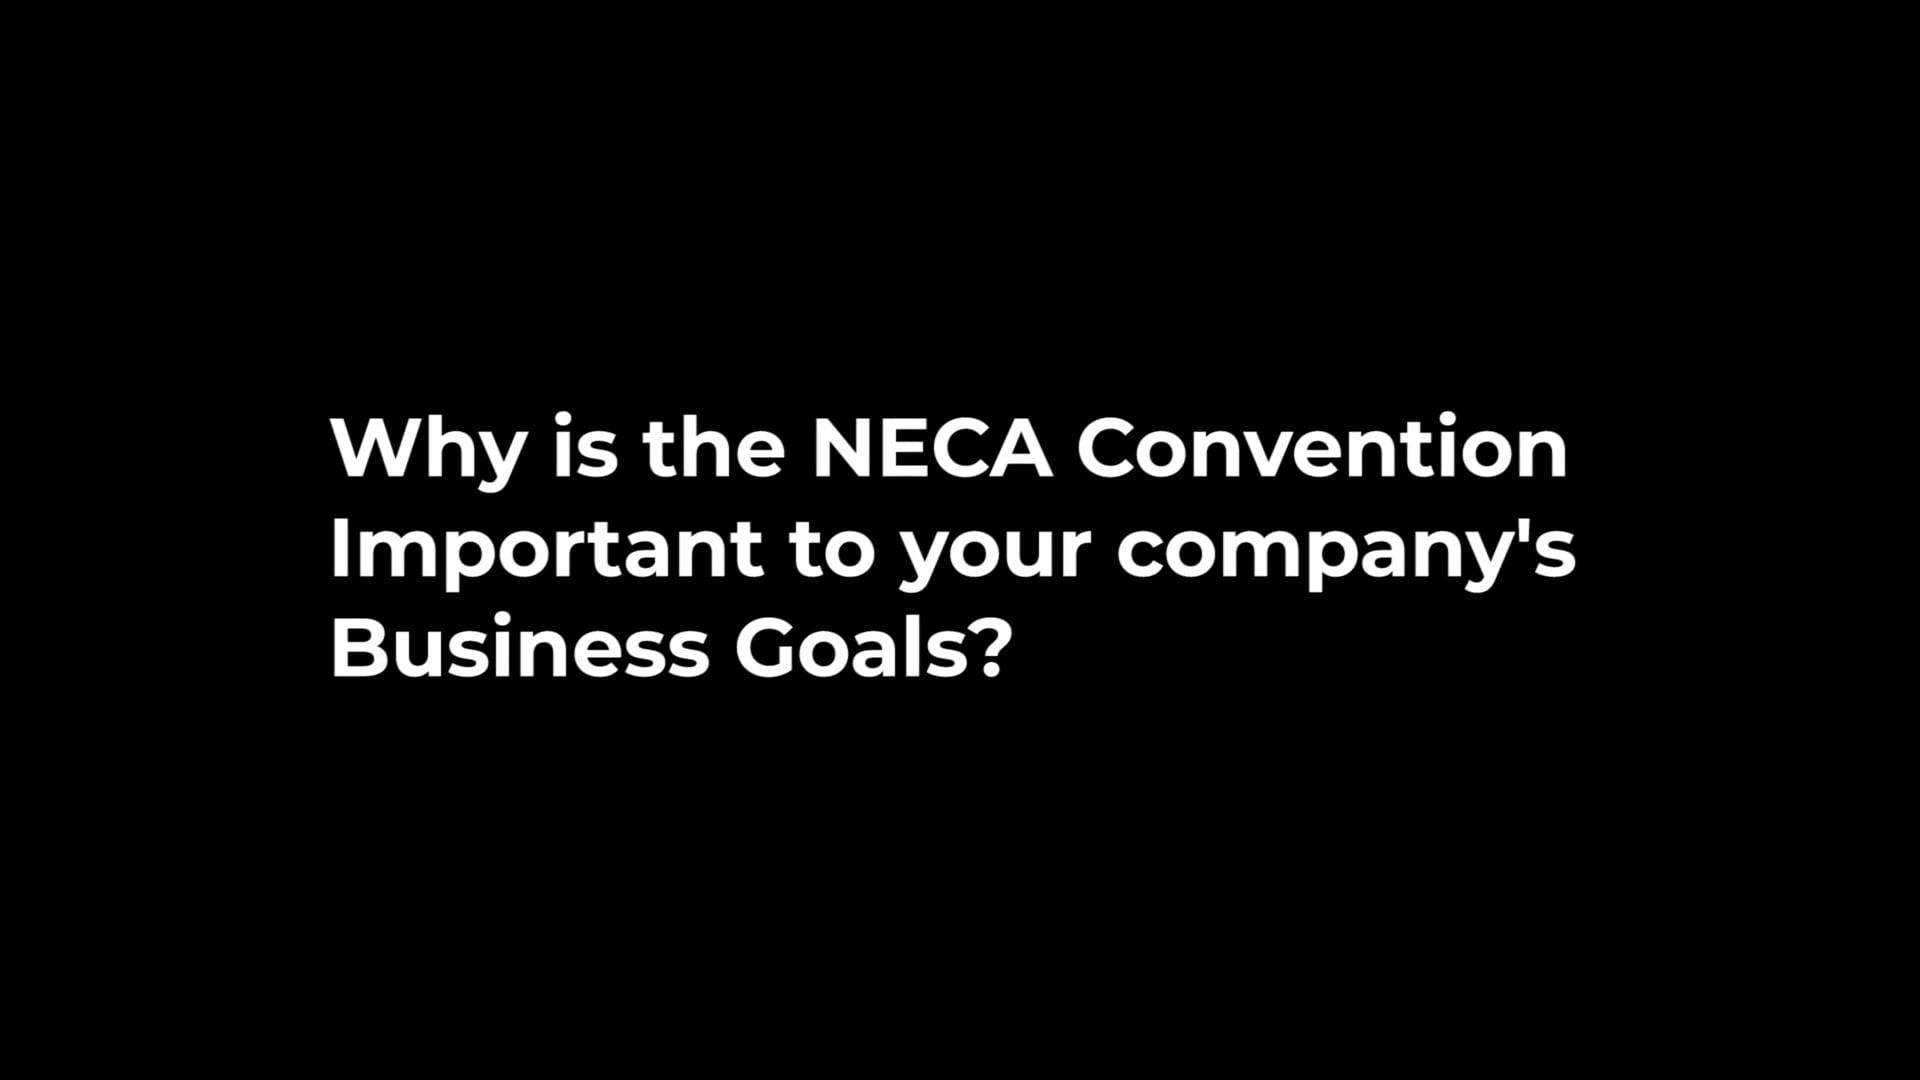 NECA Asks: Why is the NECA Convention Important to Your Company's Business Goals?